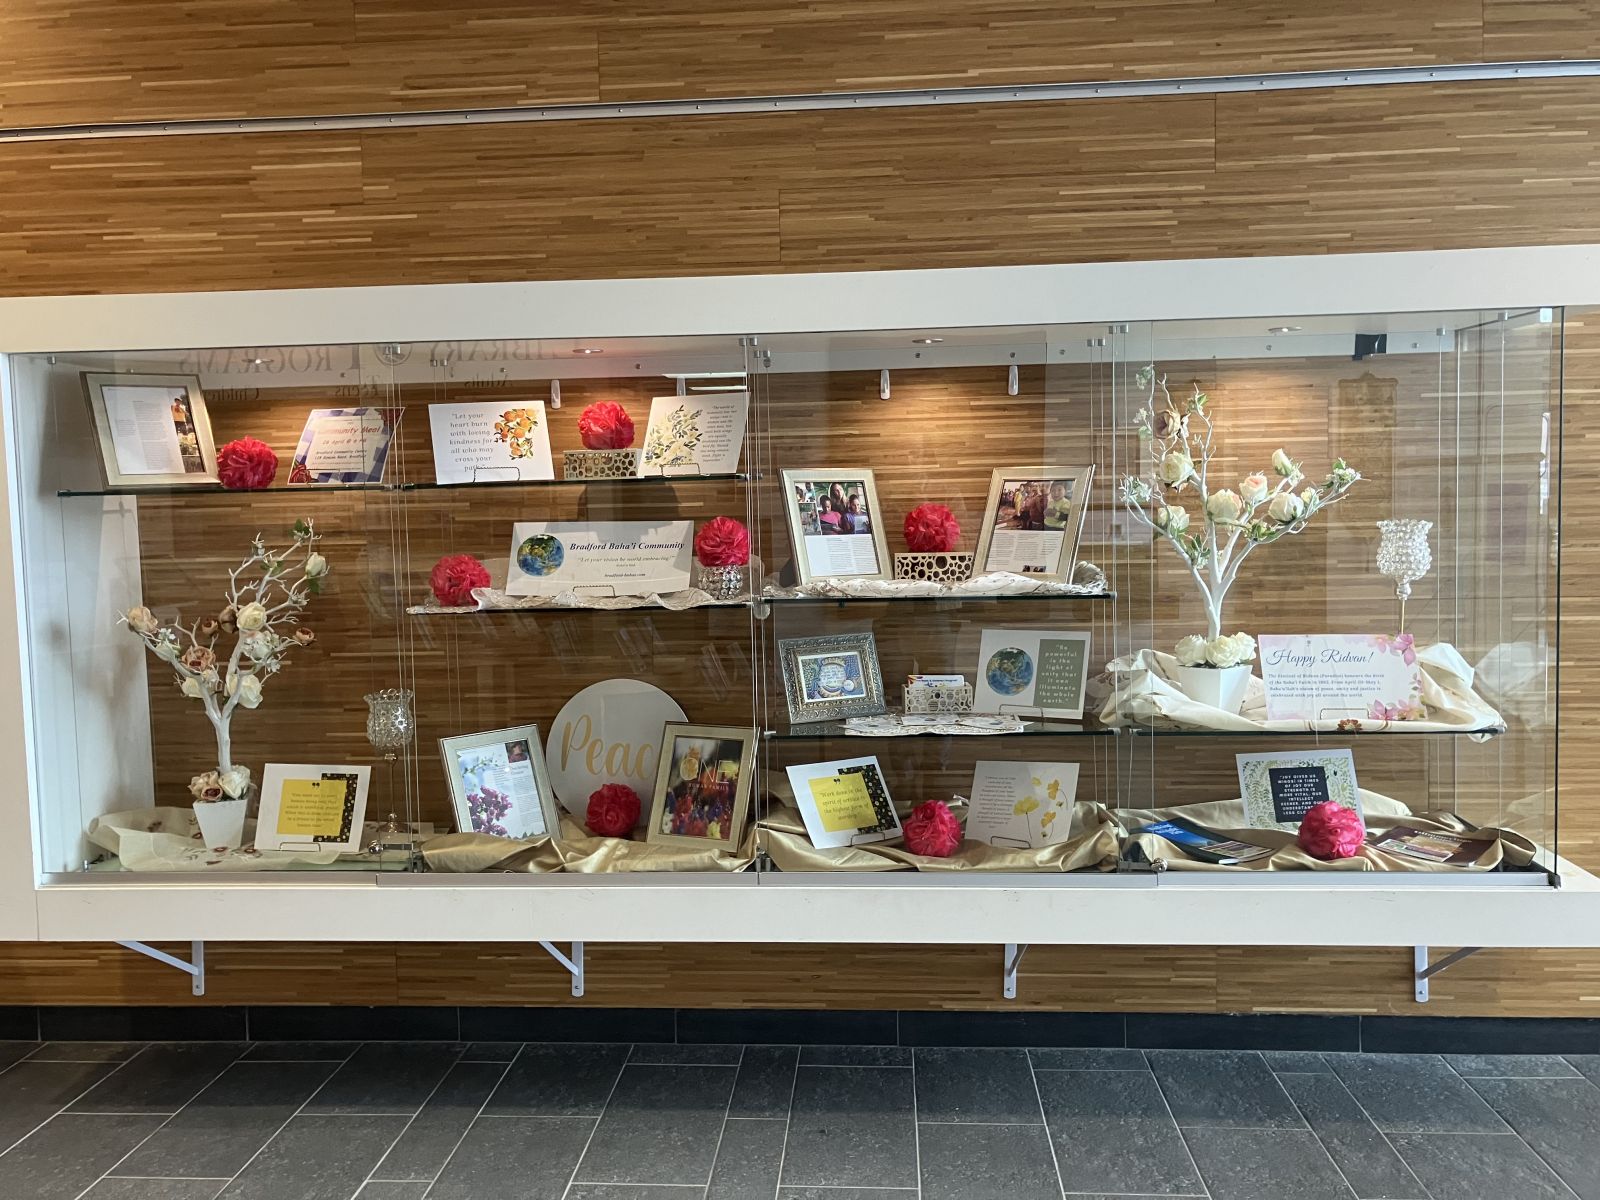 Photo of the main floor display case, filled with the display curated by the Bradford Baha'i Community